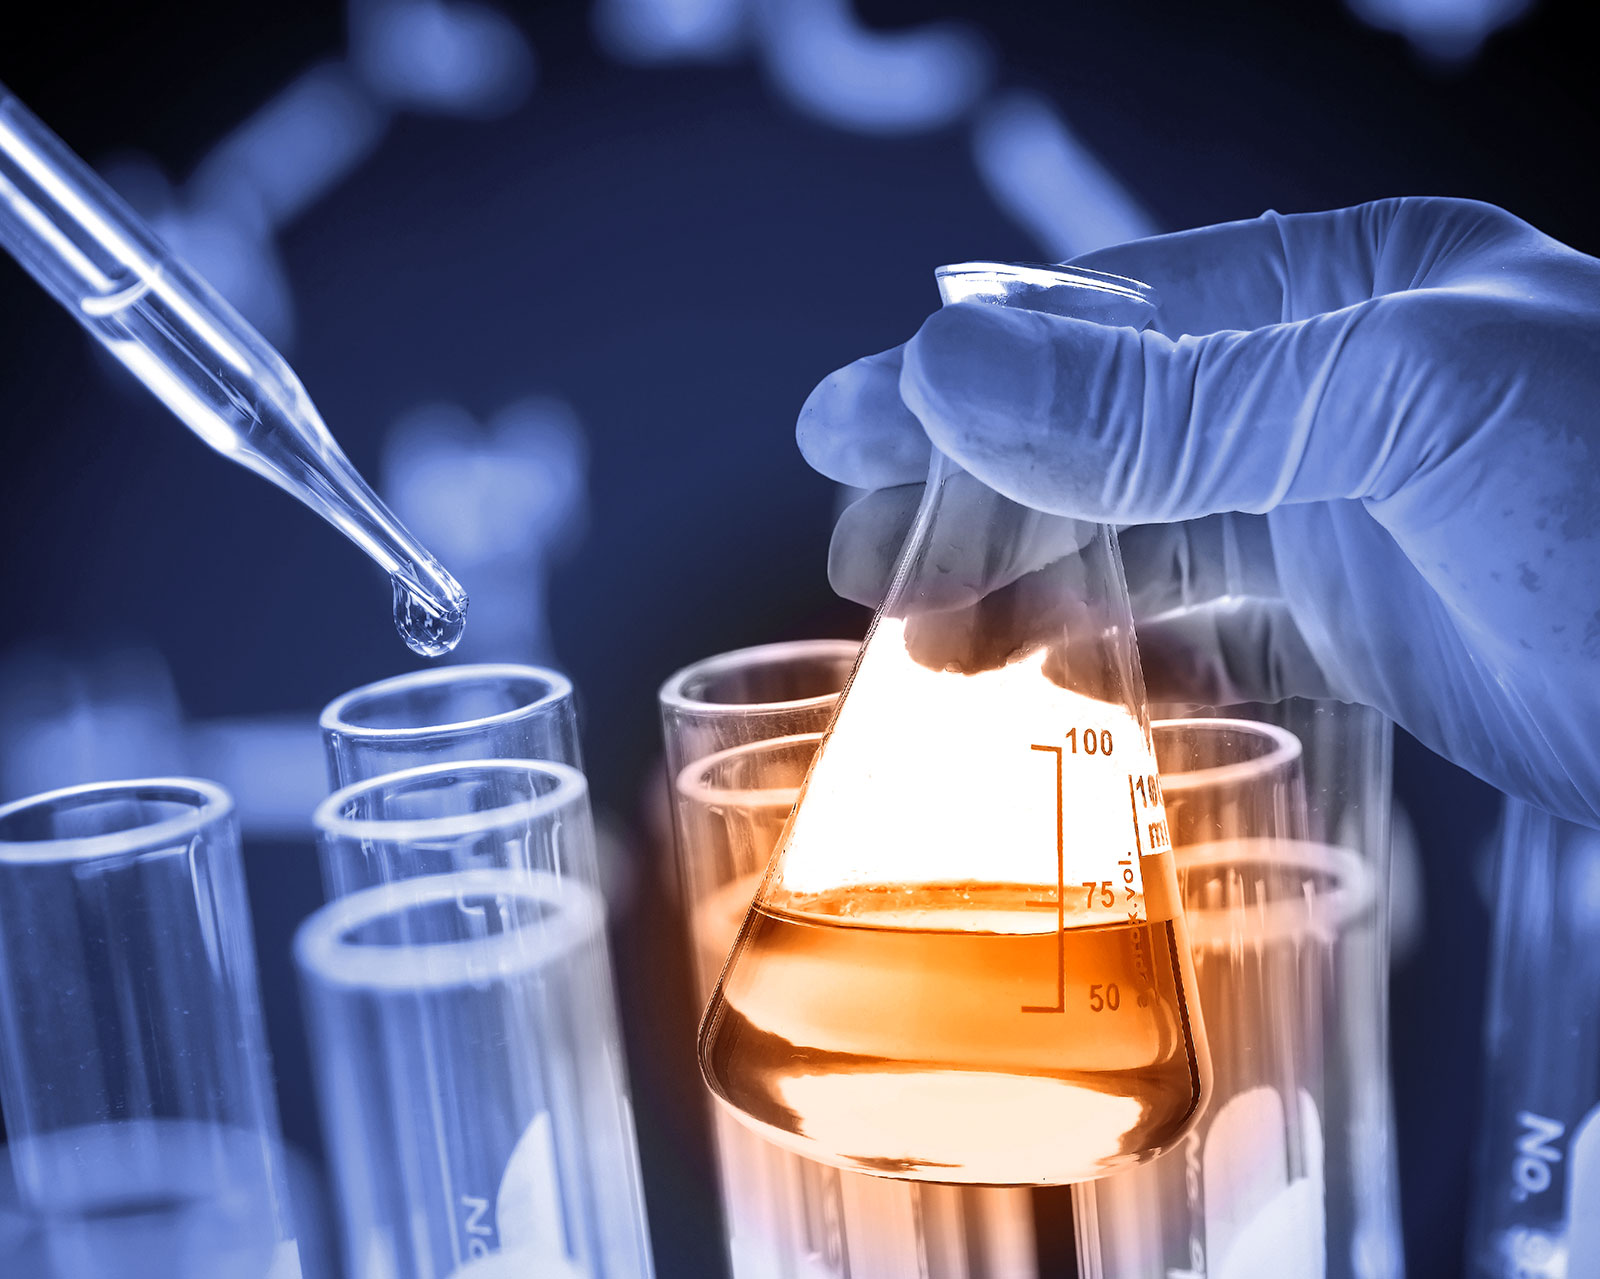 Global Endocrine Testing Market: Industry Analysis and Forecast (2019-2026)